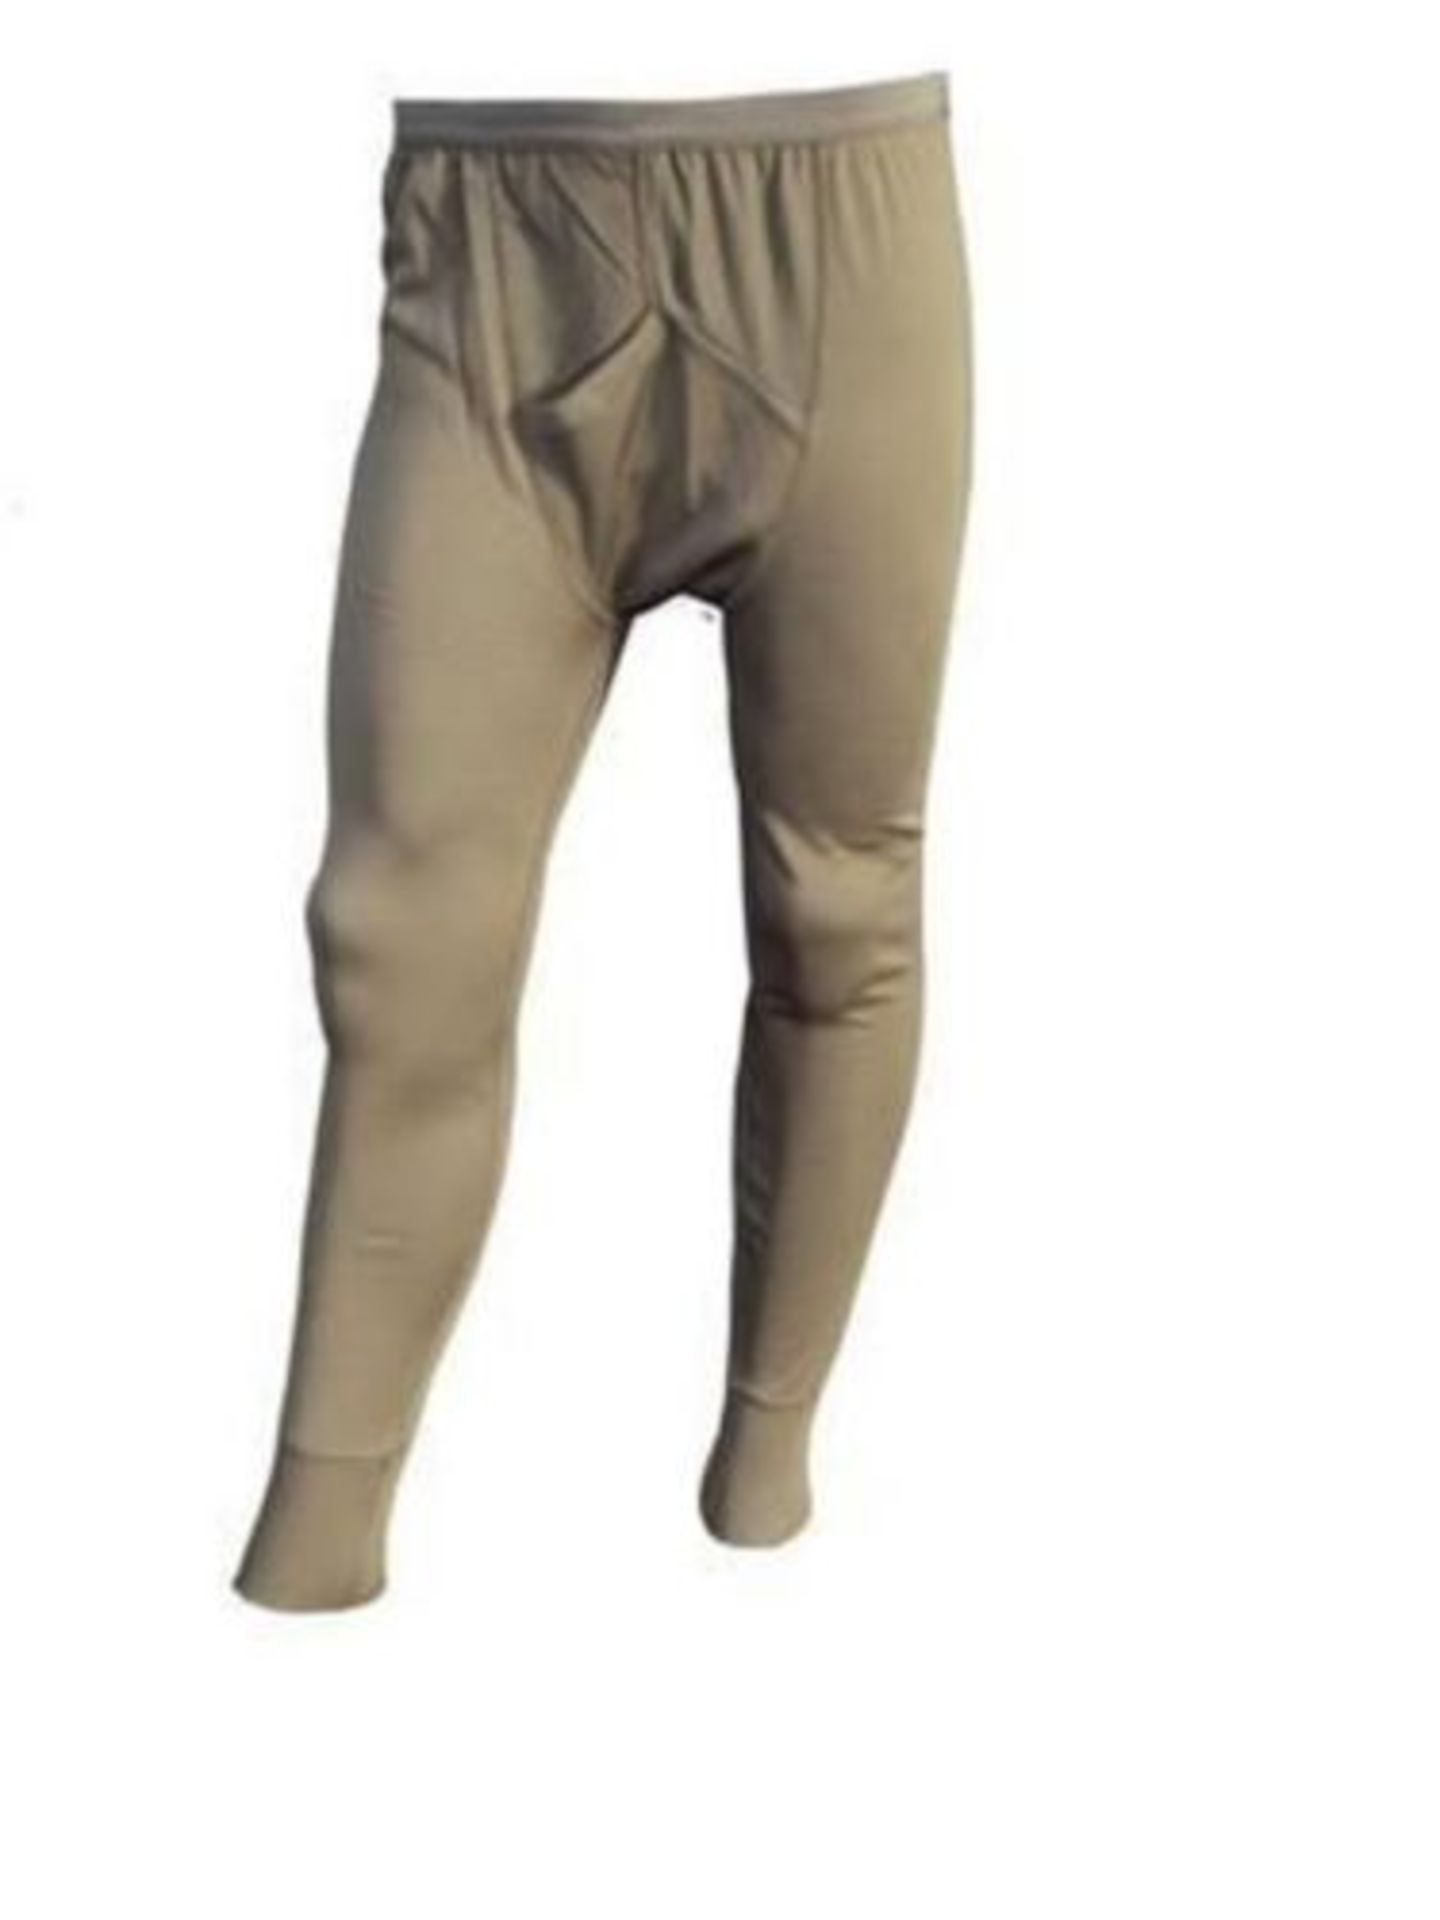 PACK OF 10 - LONG JOHNS - MIX OF SIZES - GRADE 1